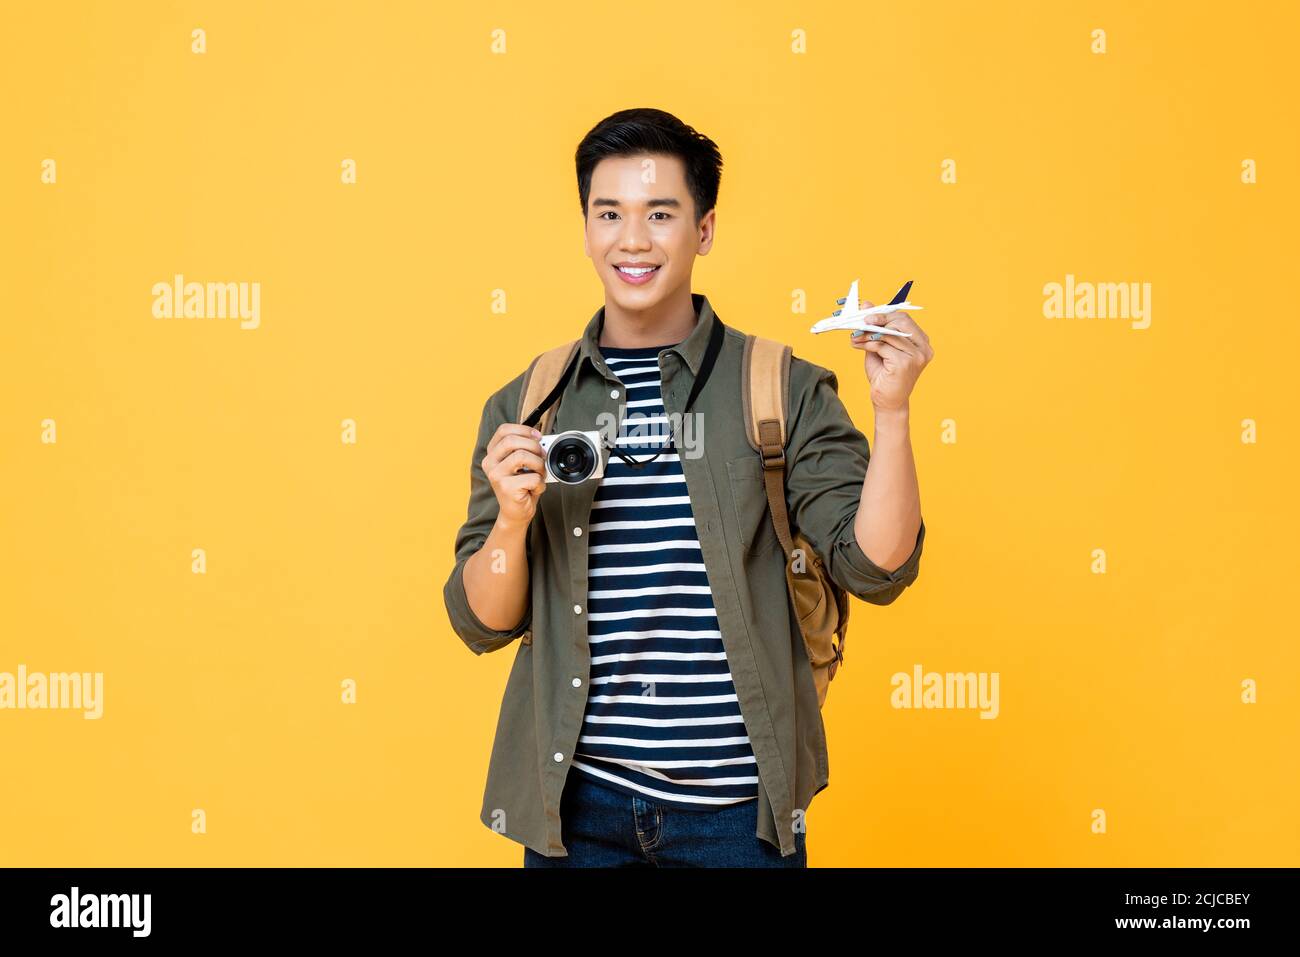 Portrait of young handsome smiling Asian male tourist backpacker holding plane model and camera isolated on studio yellow background Stock Photo